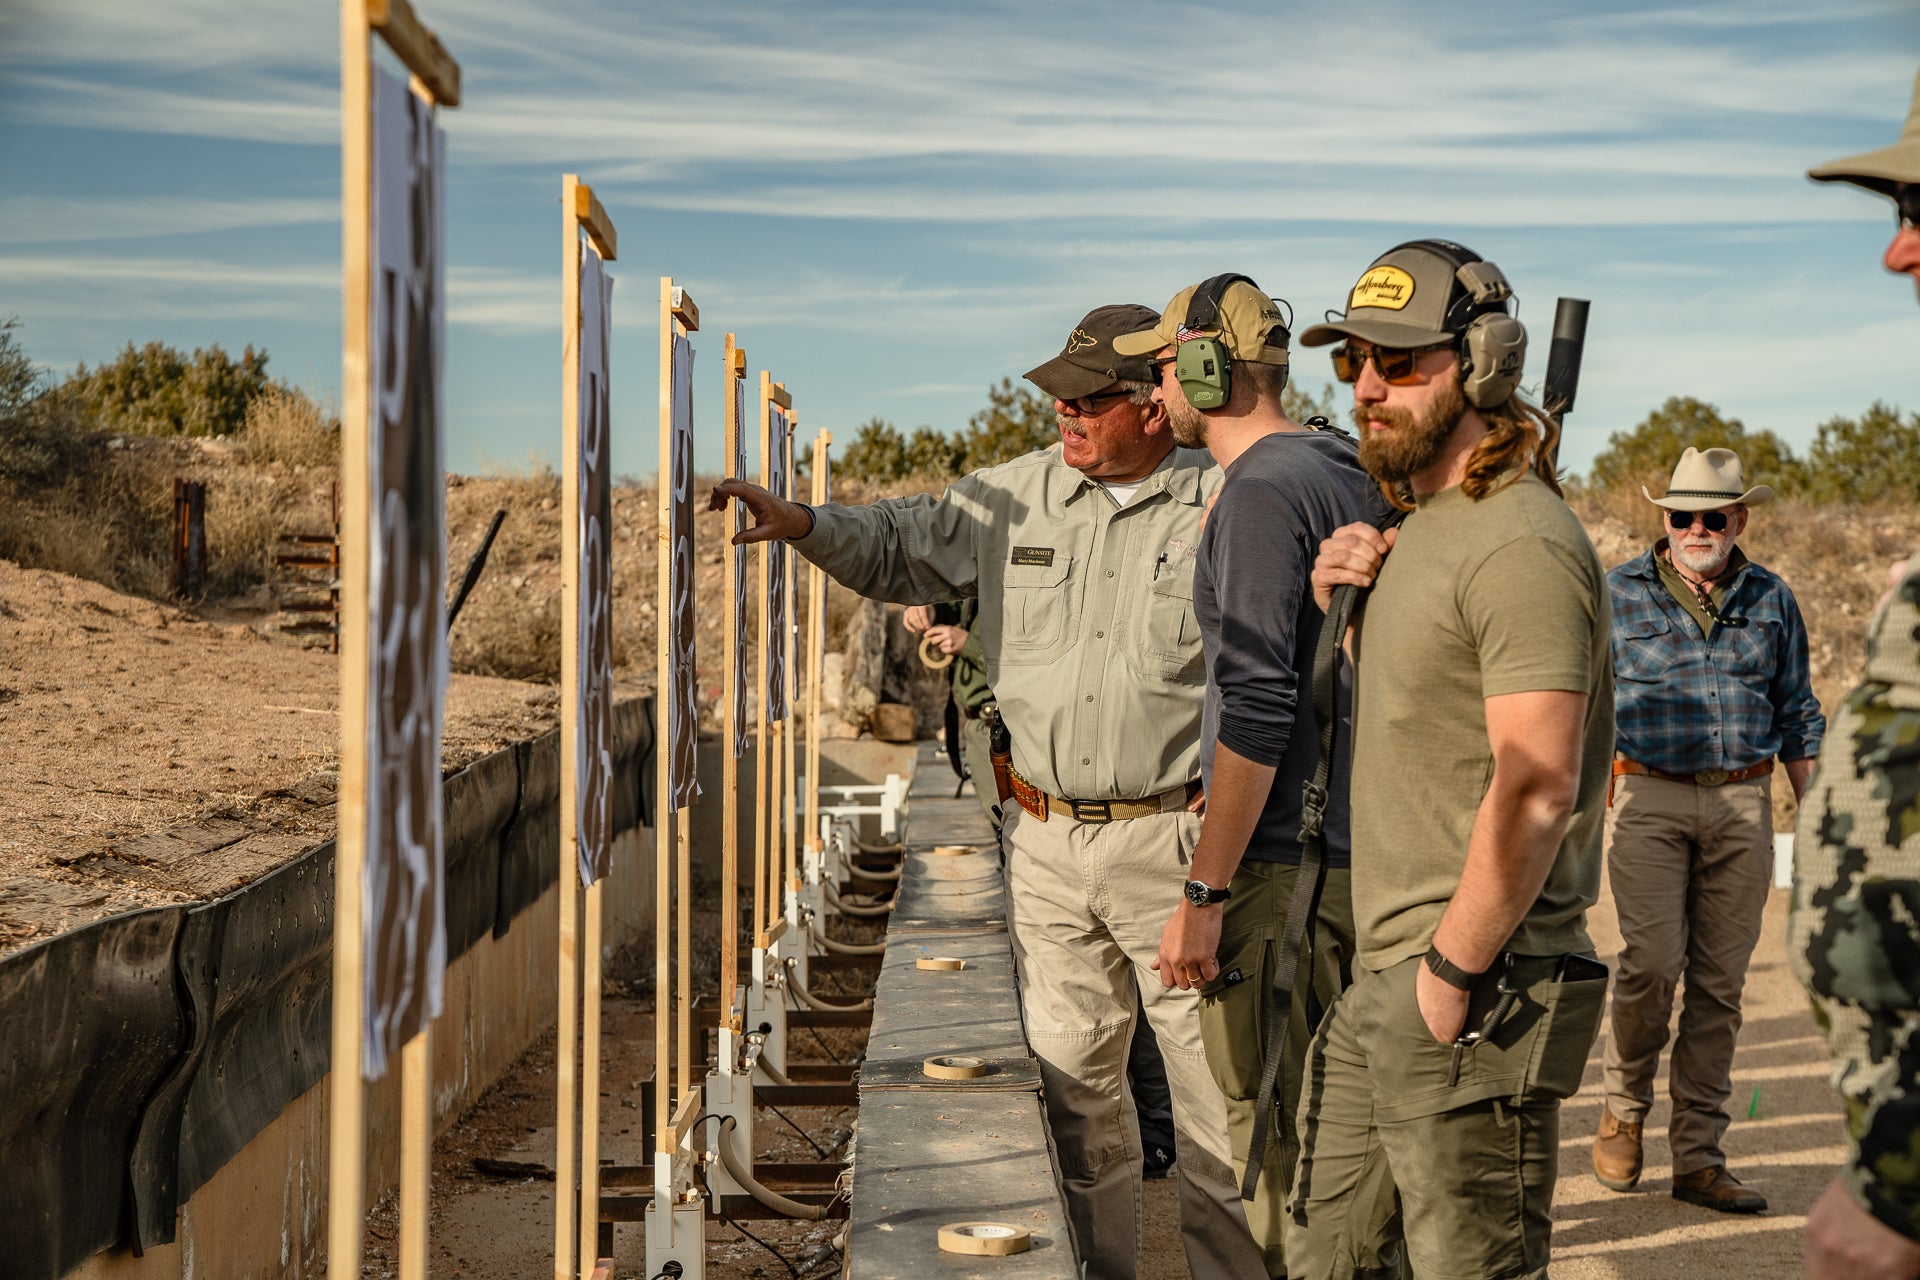 A group of shooters study their targets at a gun range.